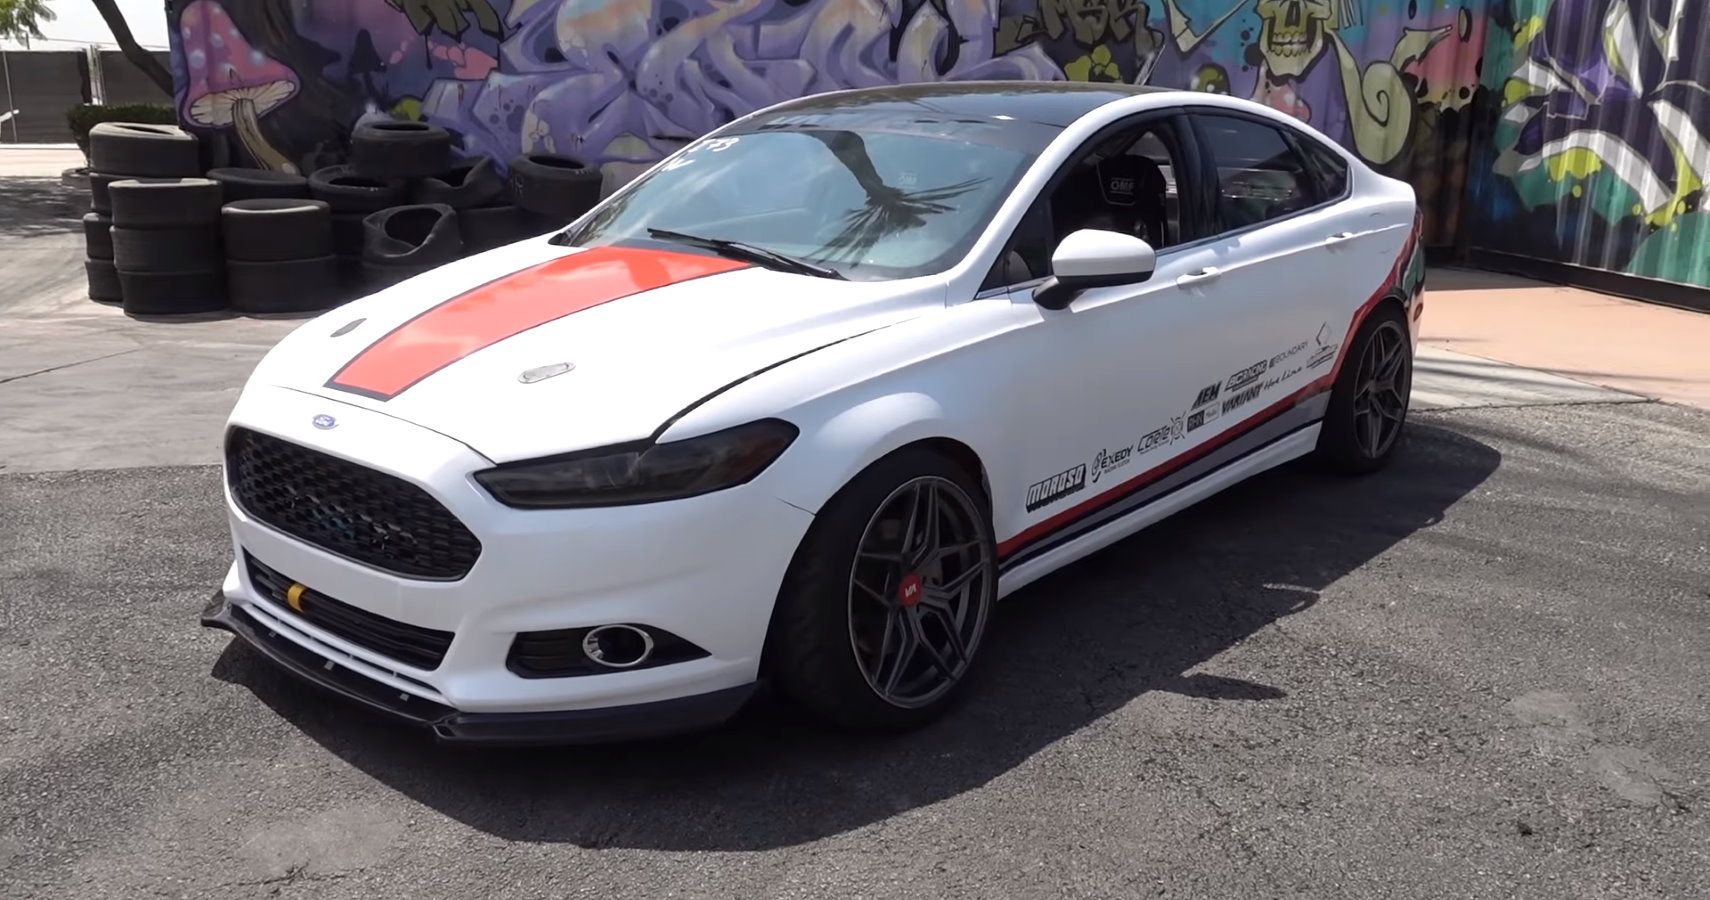 This Is A Ford Fusion With a Mustang's 5.0Liter Coyote V8